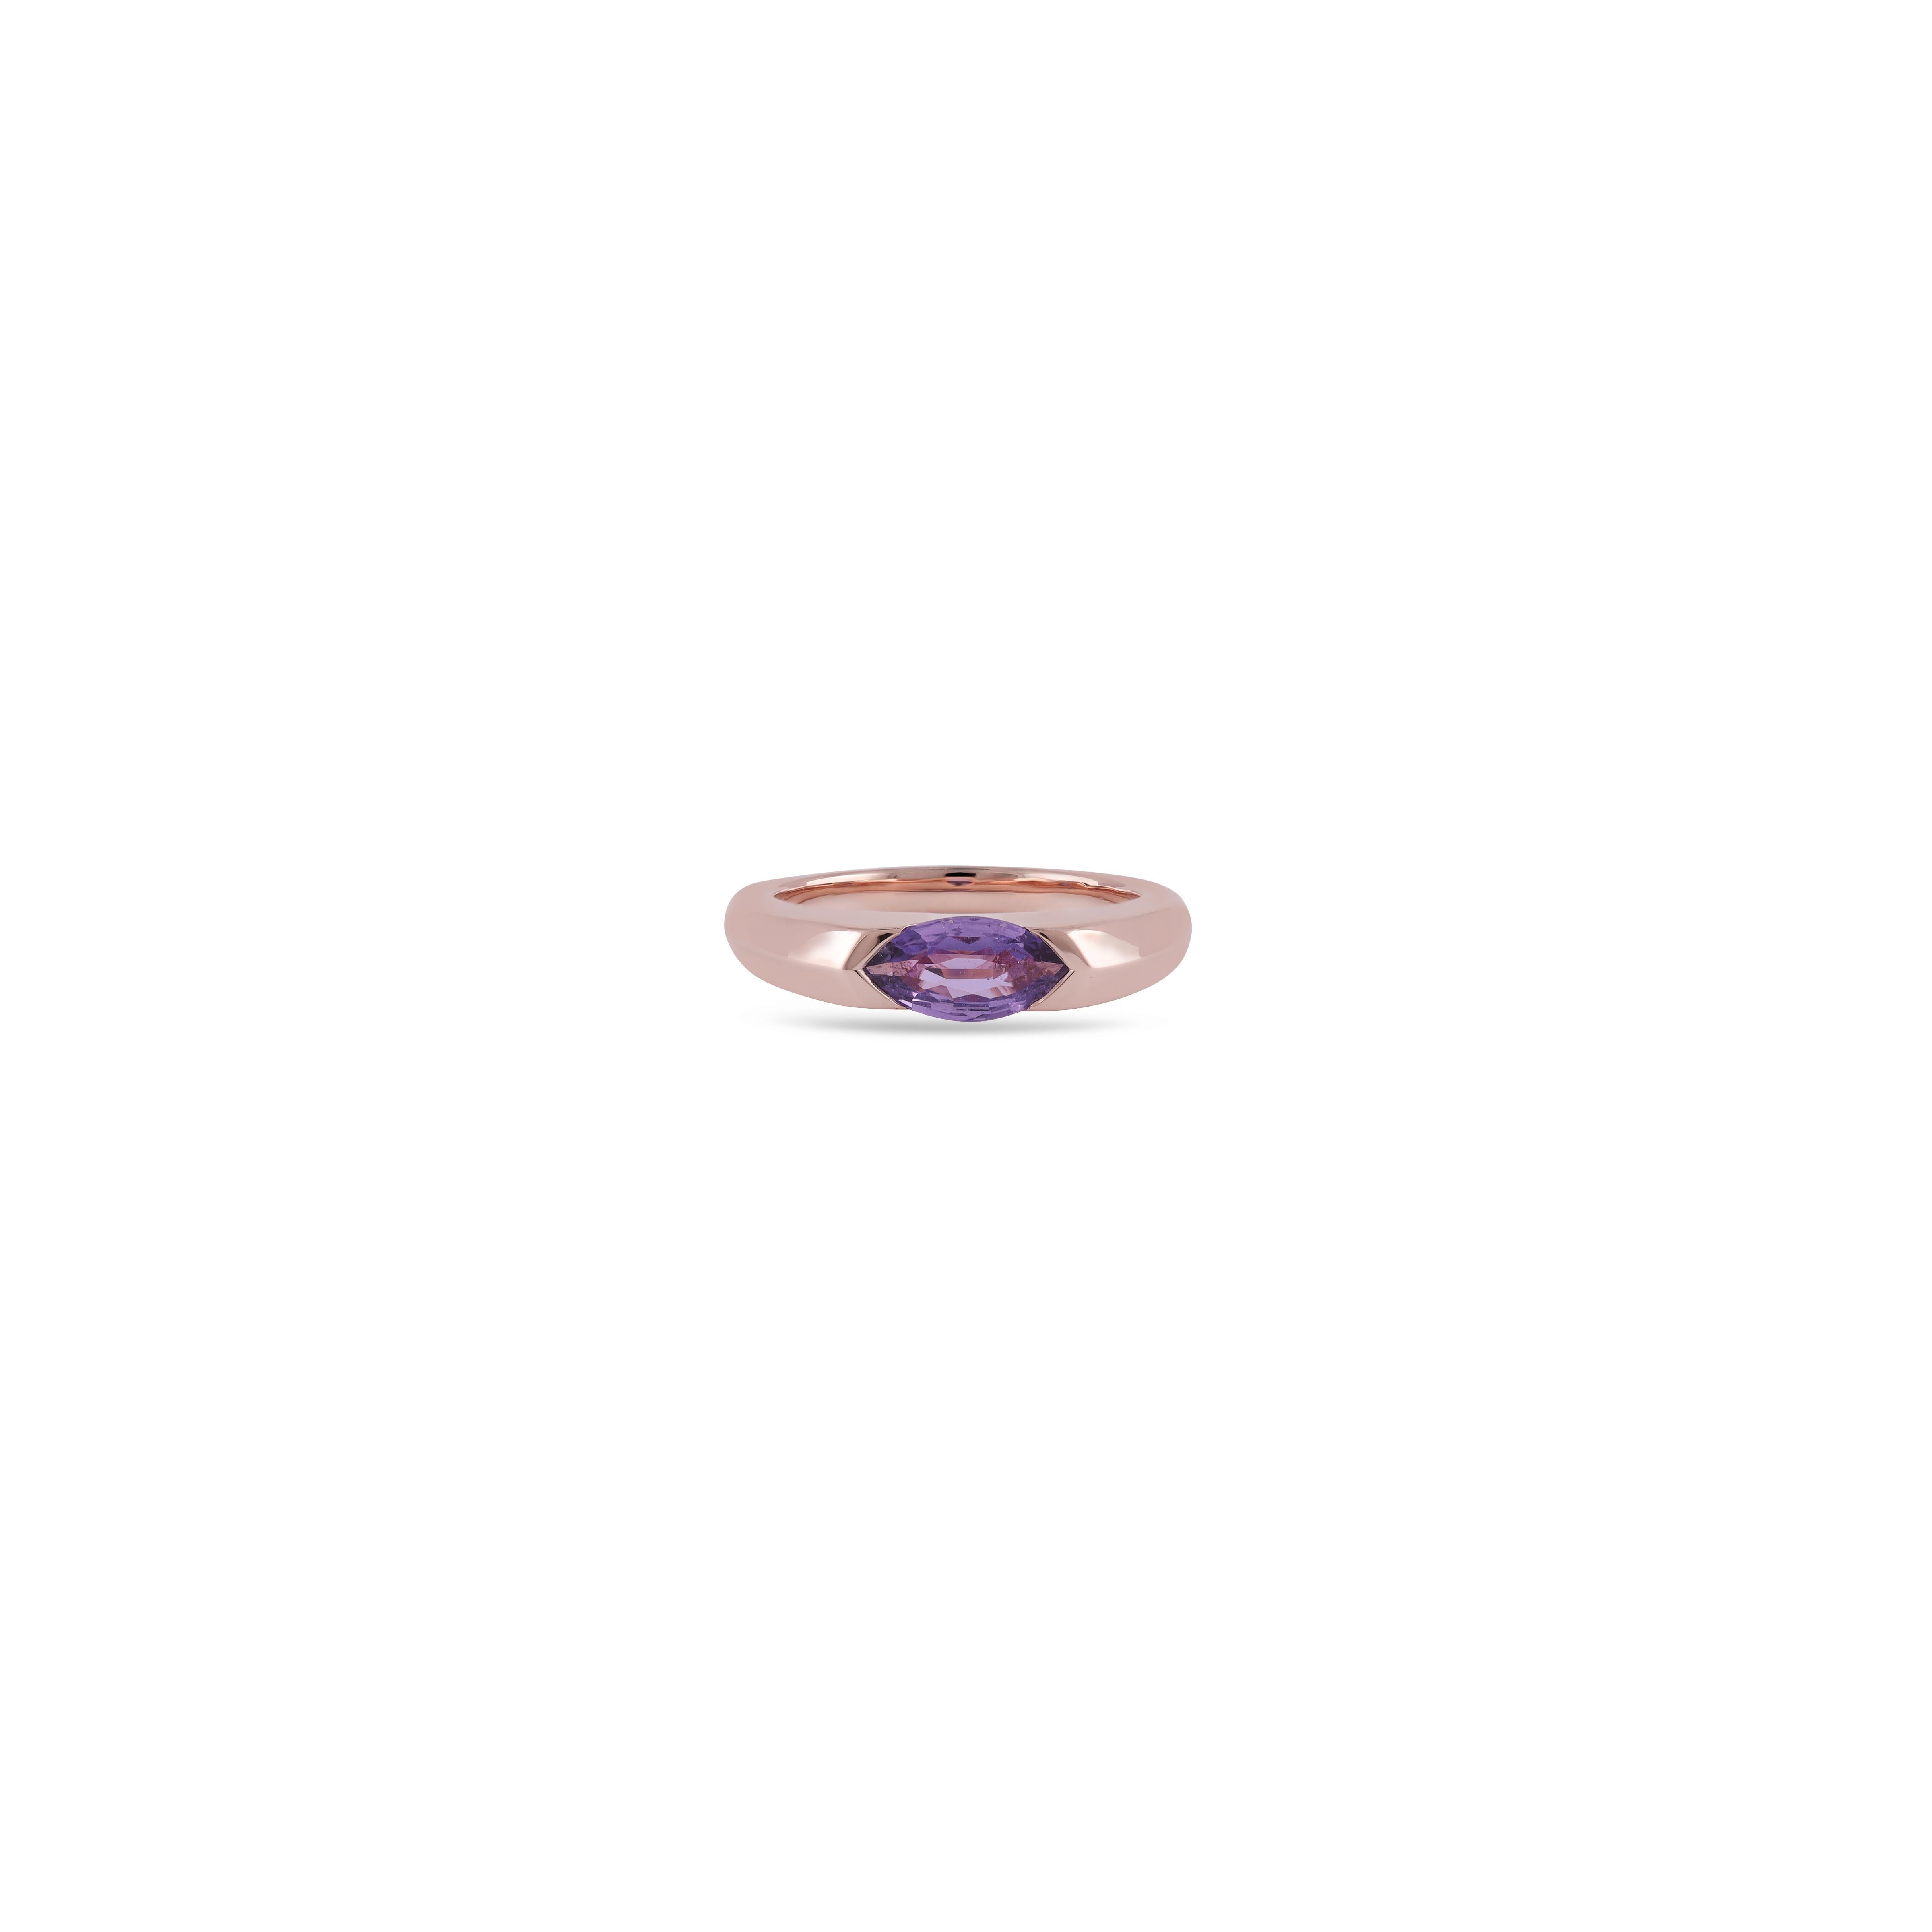 Its an exclusive Clear Multi Sapphire  ring studded in 18k Rose gold with 1 piece of Sapphire weight 0.99 carat with this entire ring is studded in 18k Rose gold , ring size can be change as per the requirement, its an exclusive wearable ring.
size